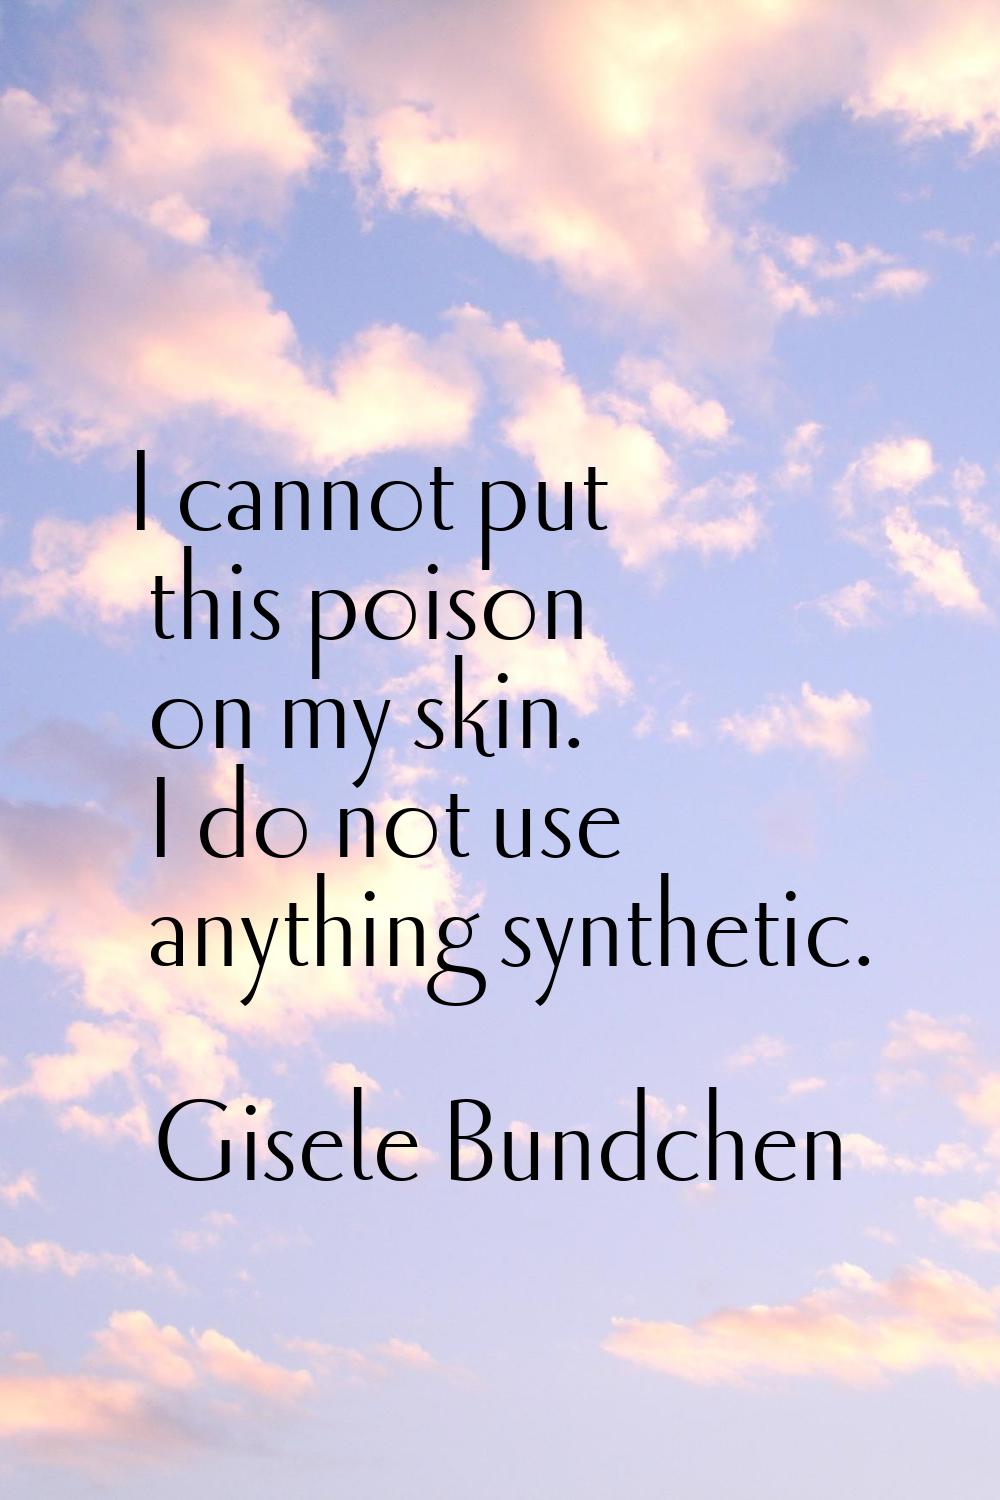 I cannot put this poison on my skin. I do not use anything synthetic.